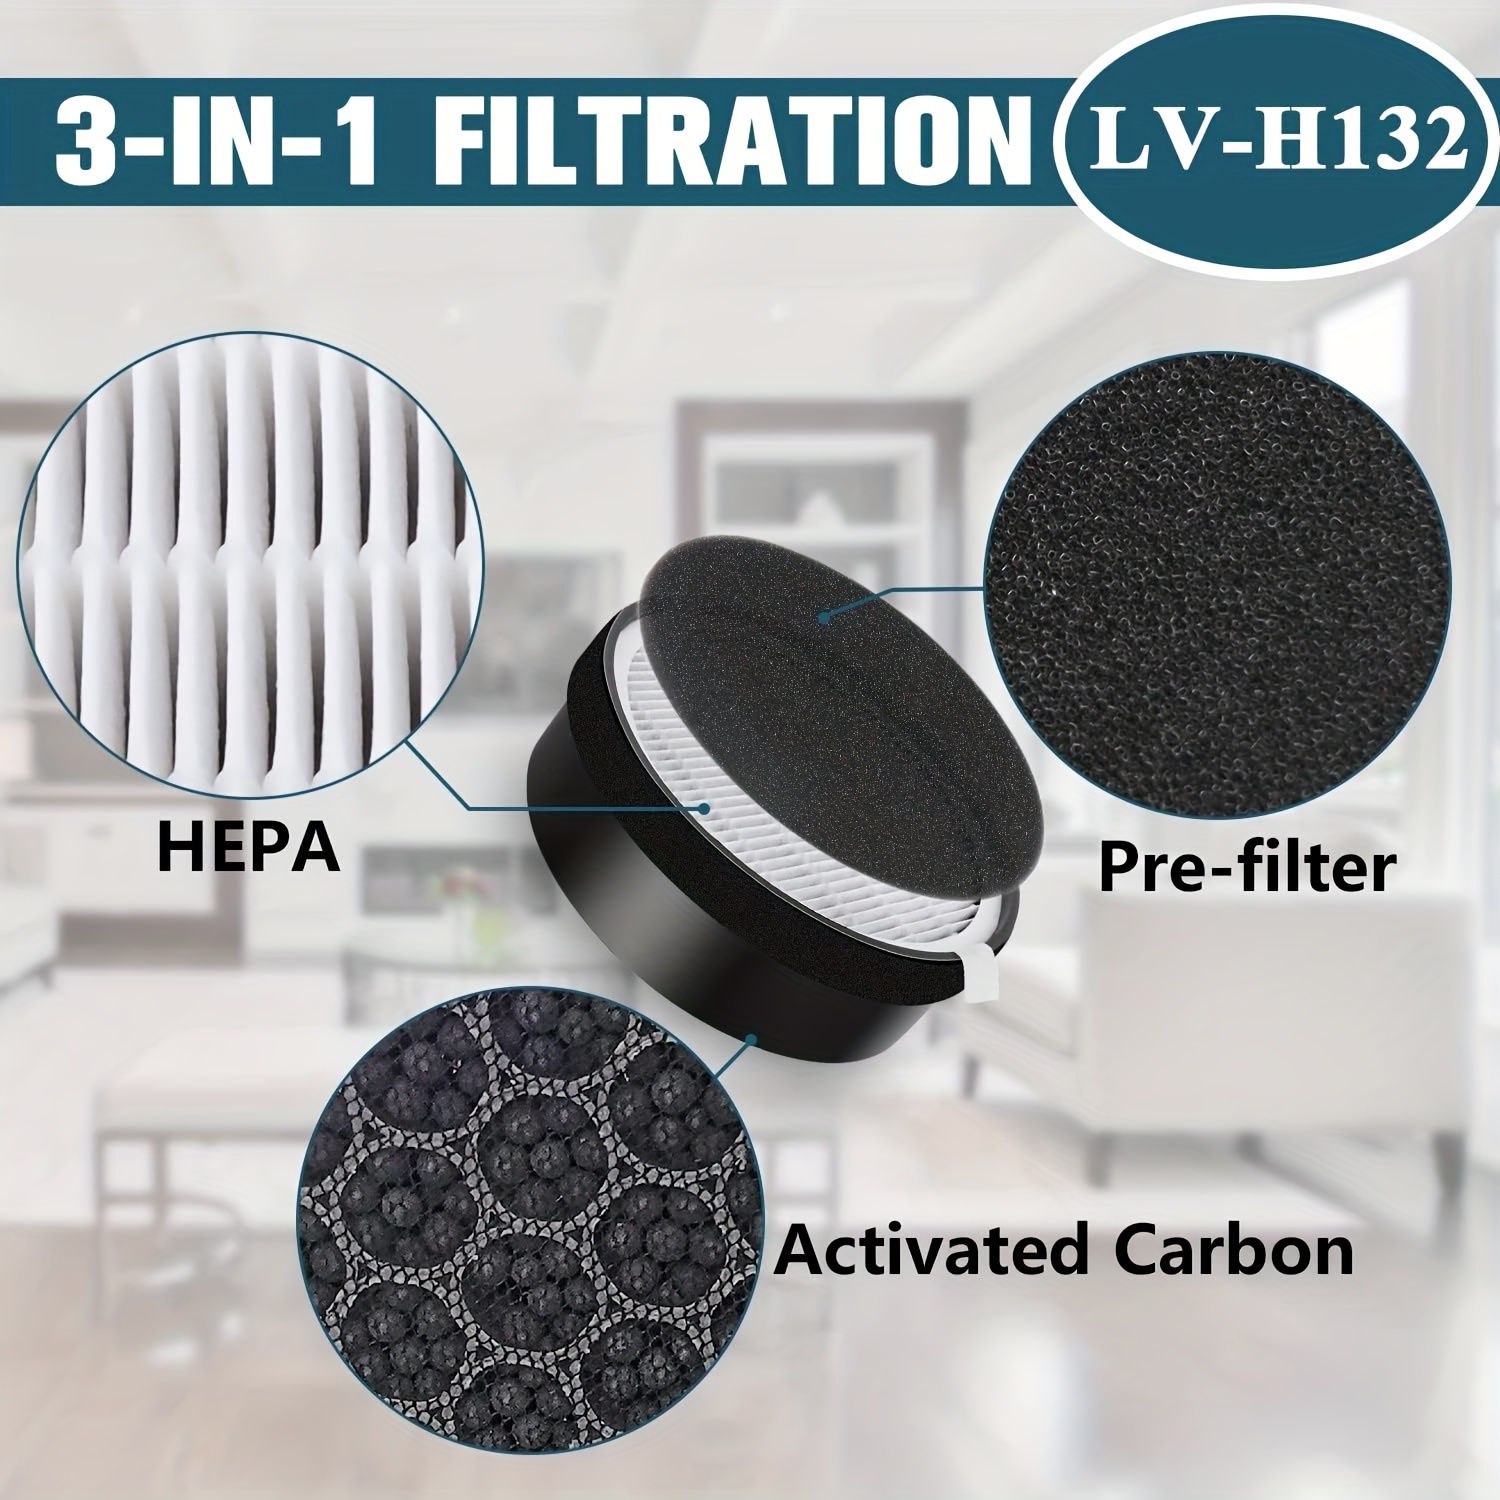  LV-H132 Filter Replacement for LEVOIT Air Puri-fier, 3-in-1  Pre, H13 Activated Carbon Filtration System, Replace Part LV-H132-RF, Pack  of 3 : Automotive